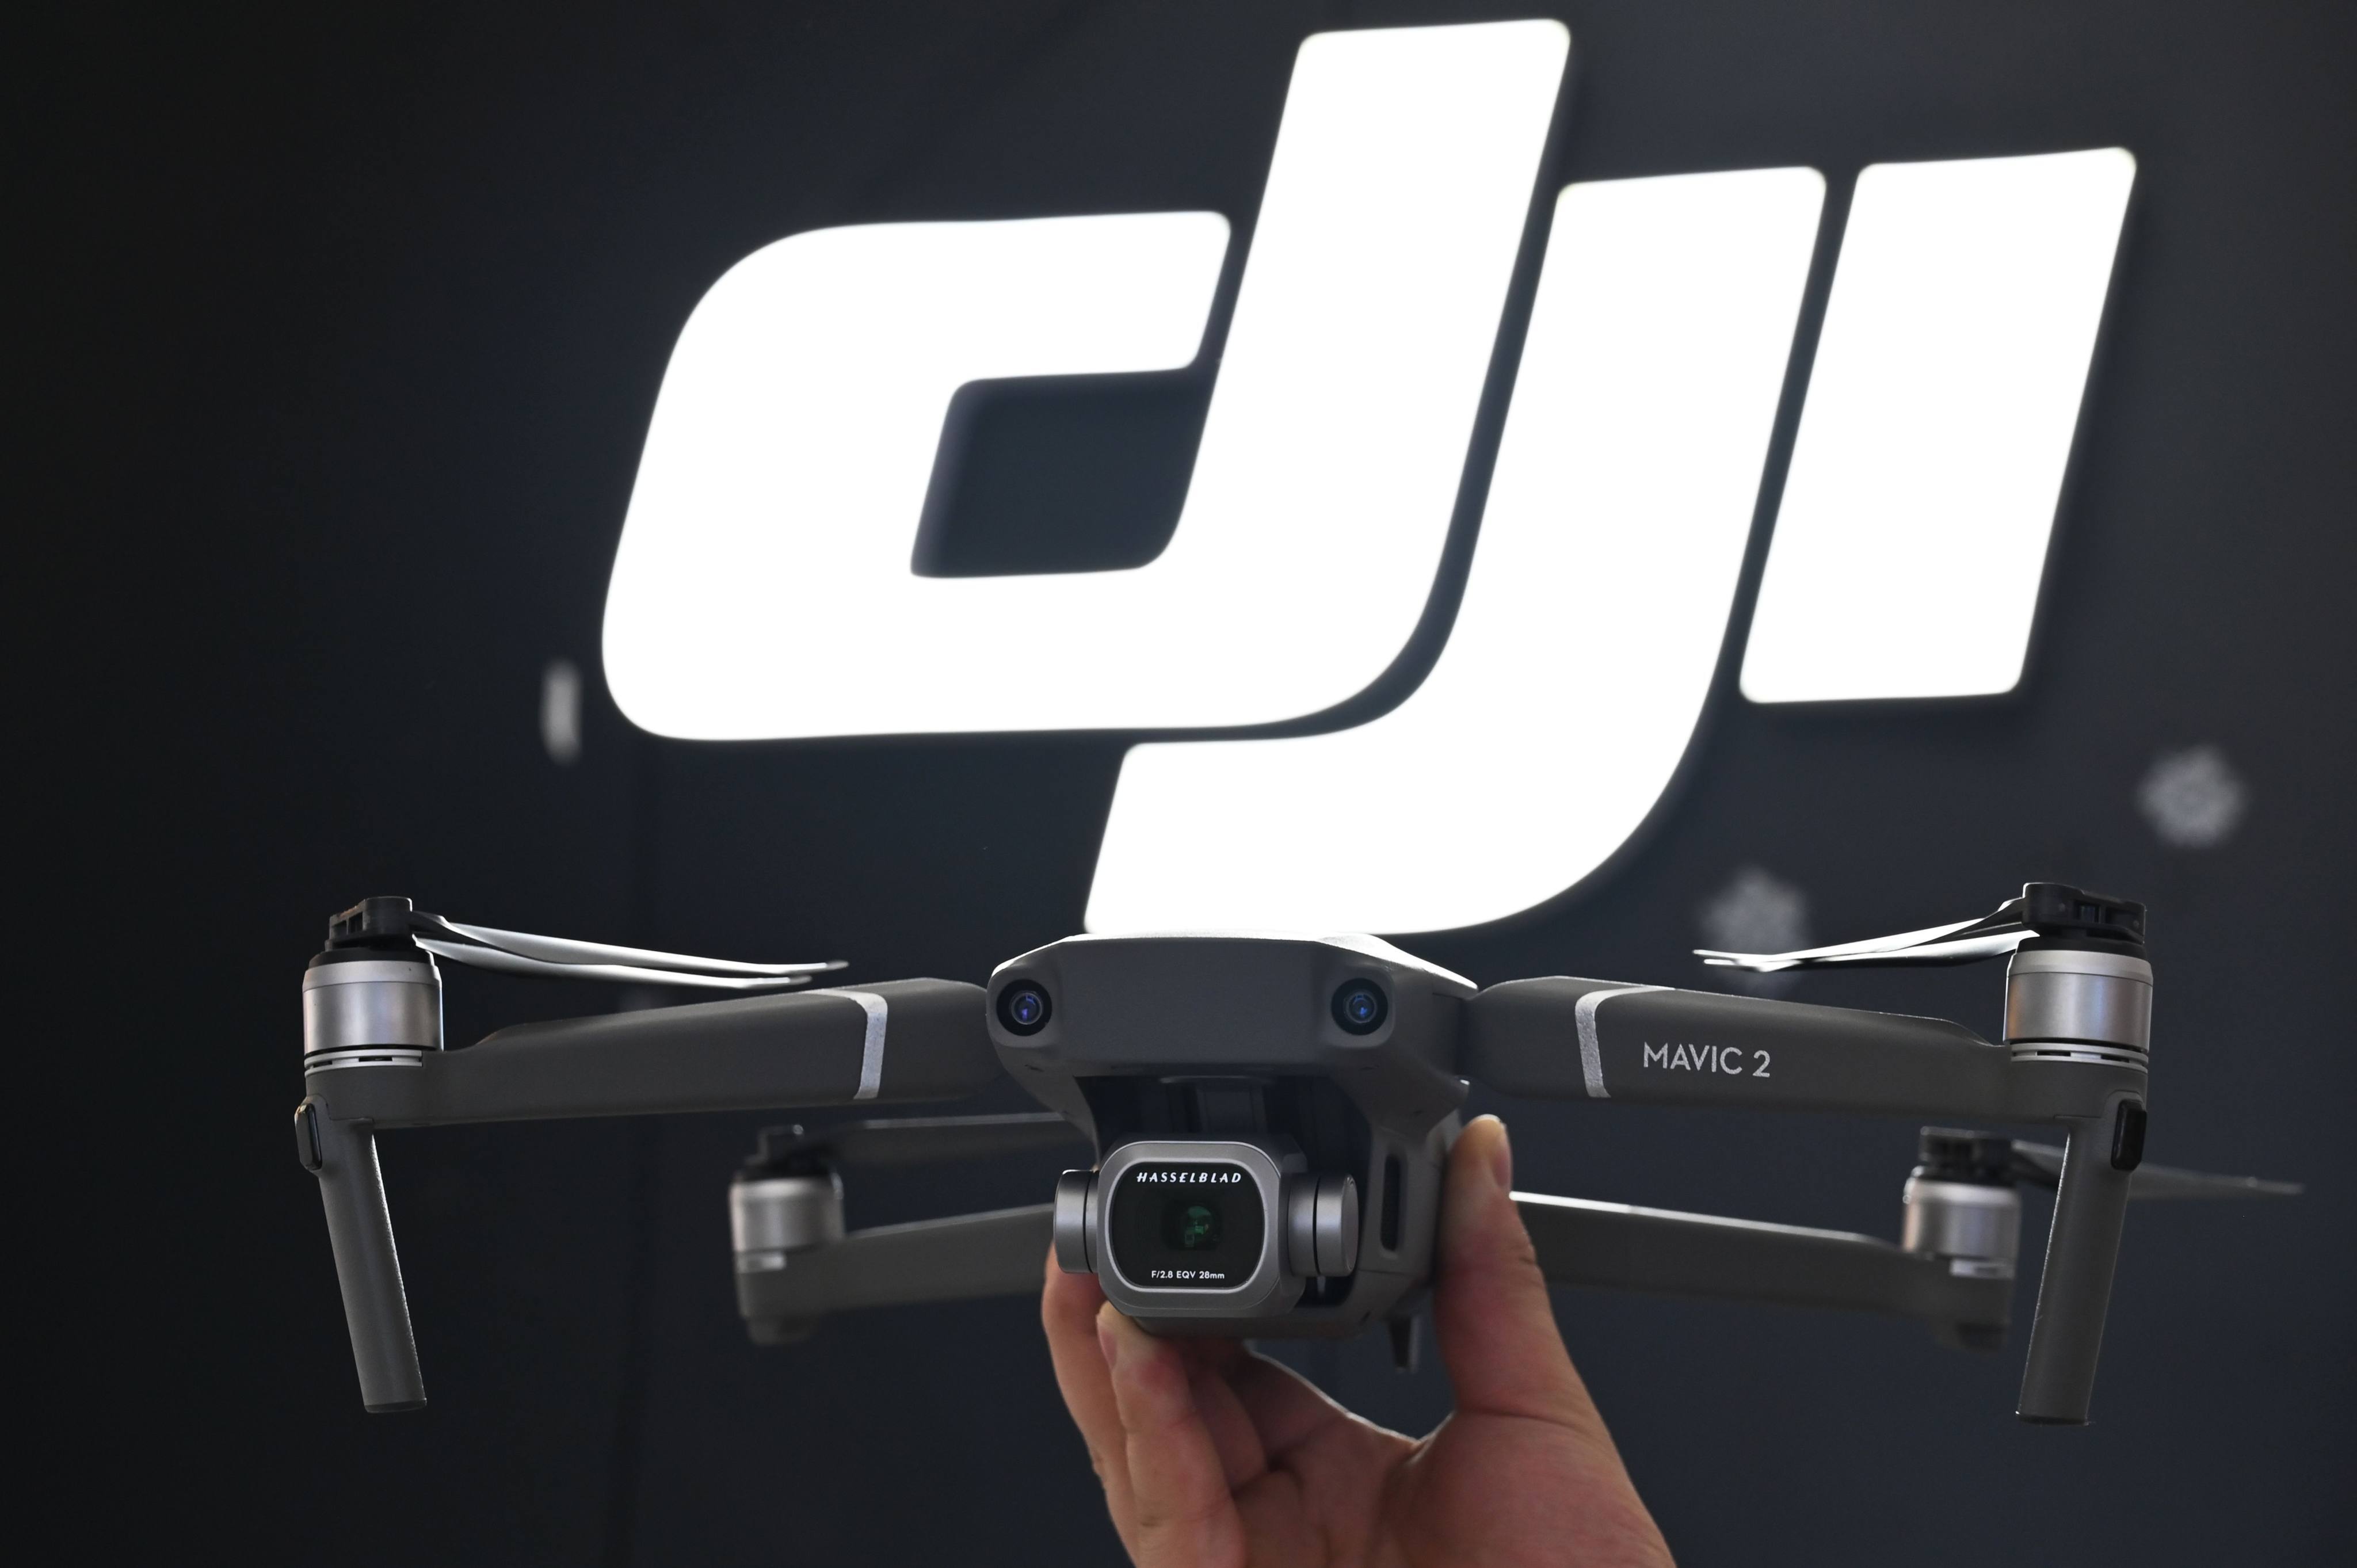 An employee shows the Mavic Pro 2 drone in a DJI store in Shanghai on May 22, 2019. Photo: Agence France-Presse